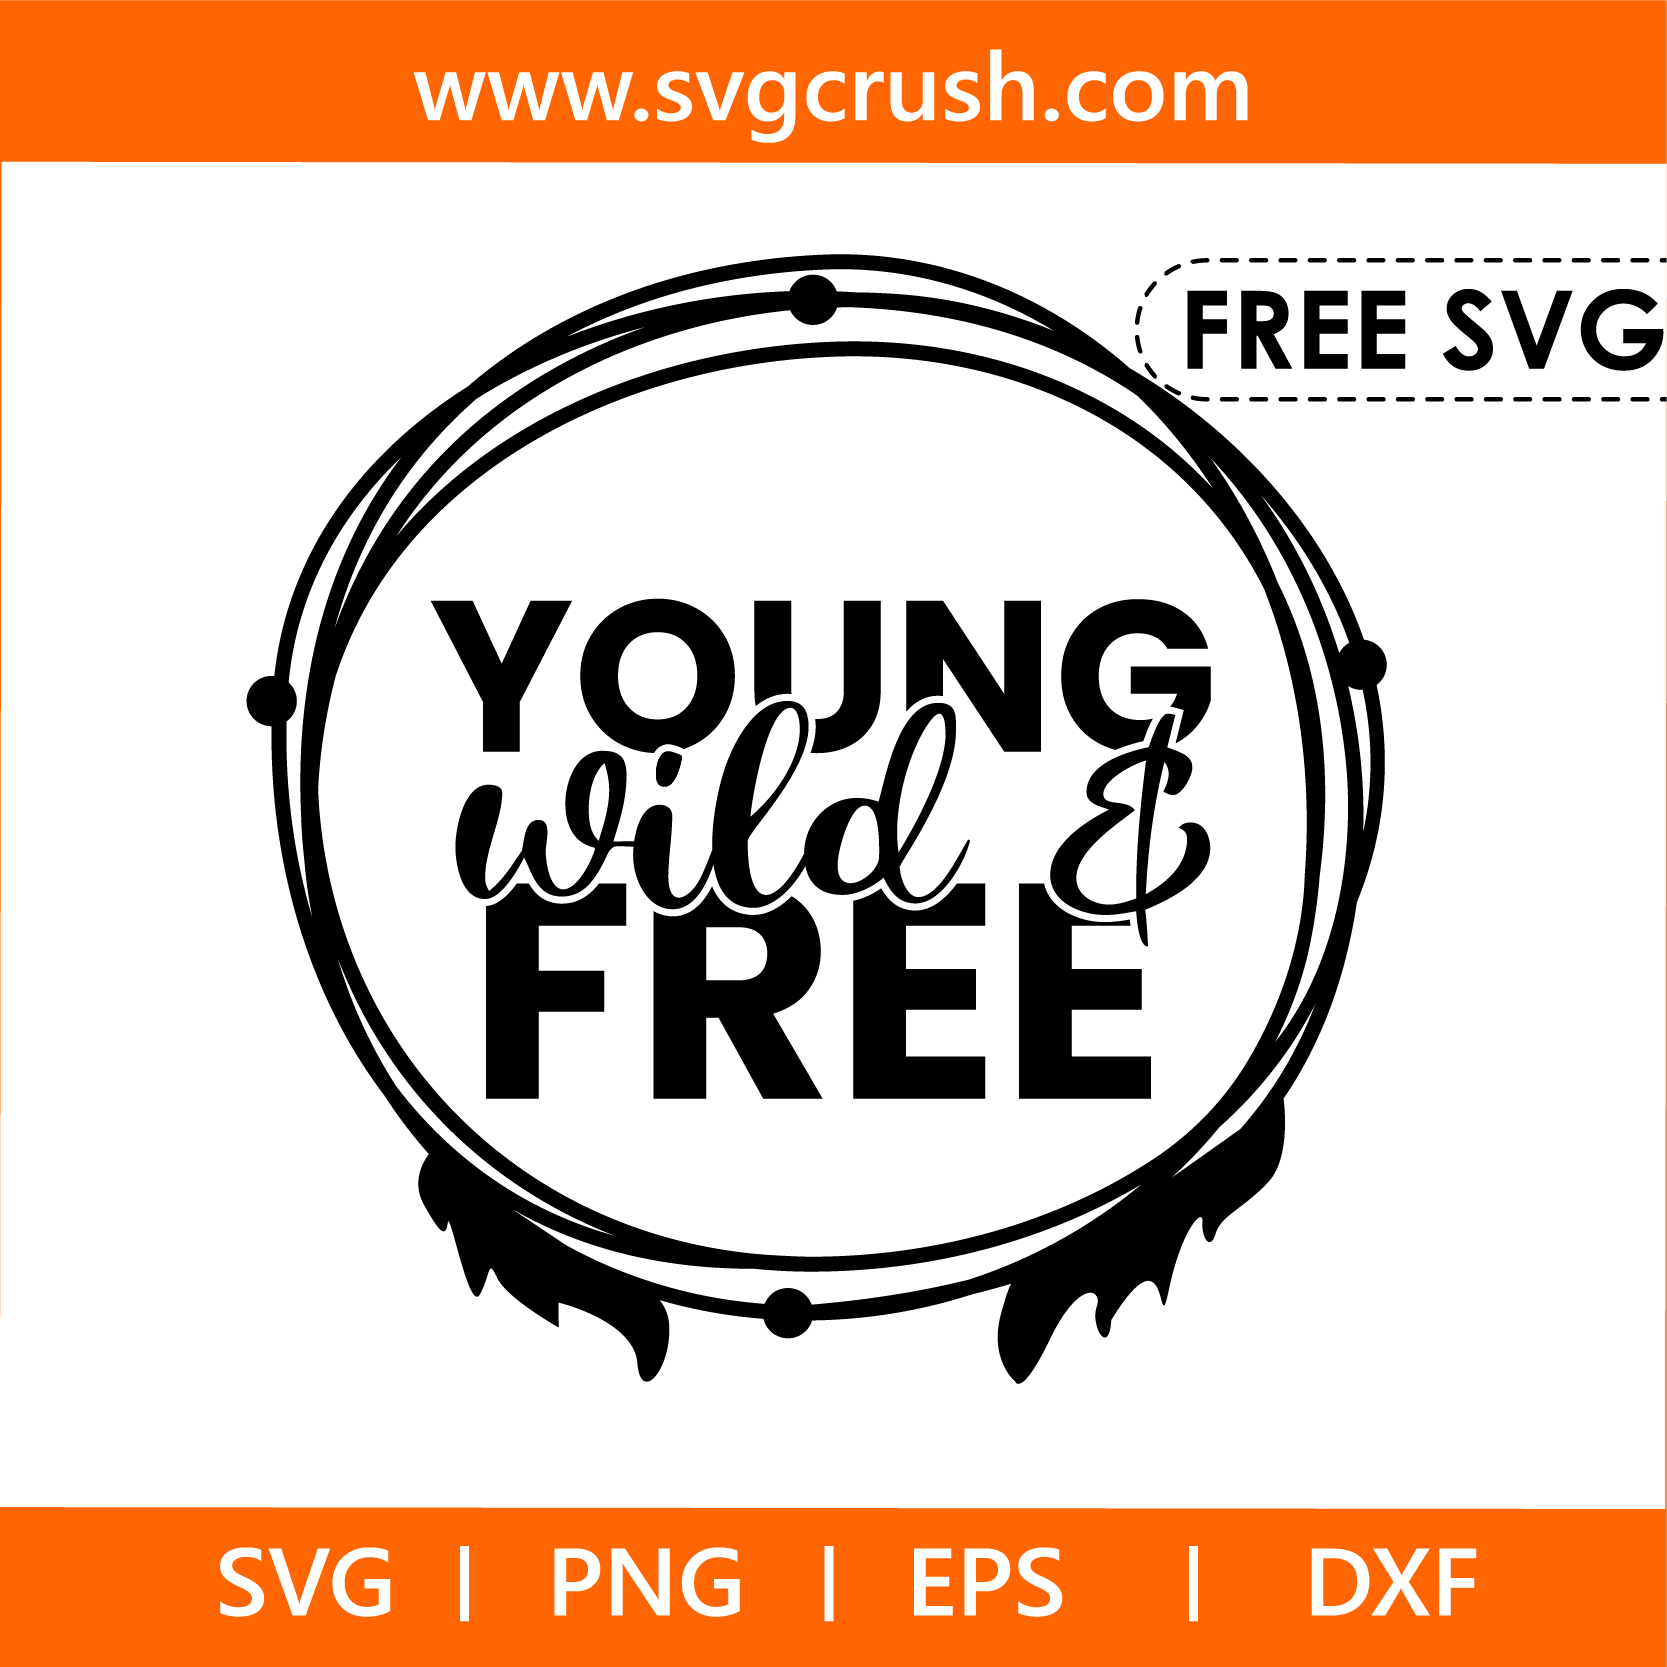 free young-wild-and-free-005 svg